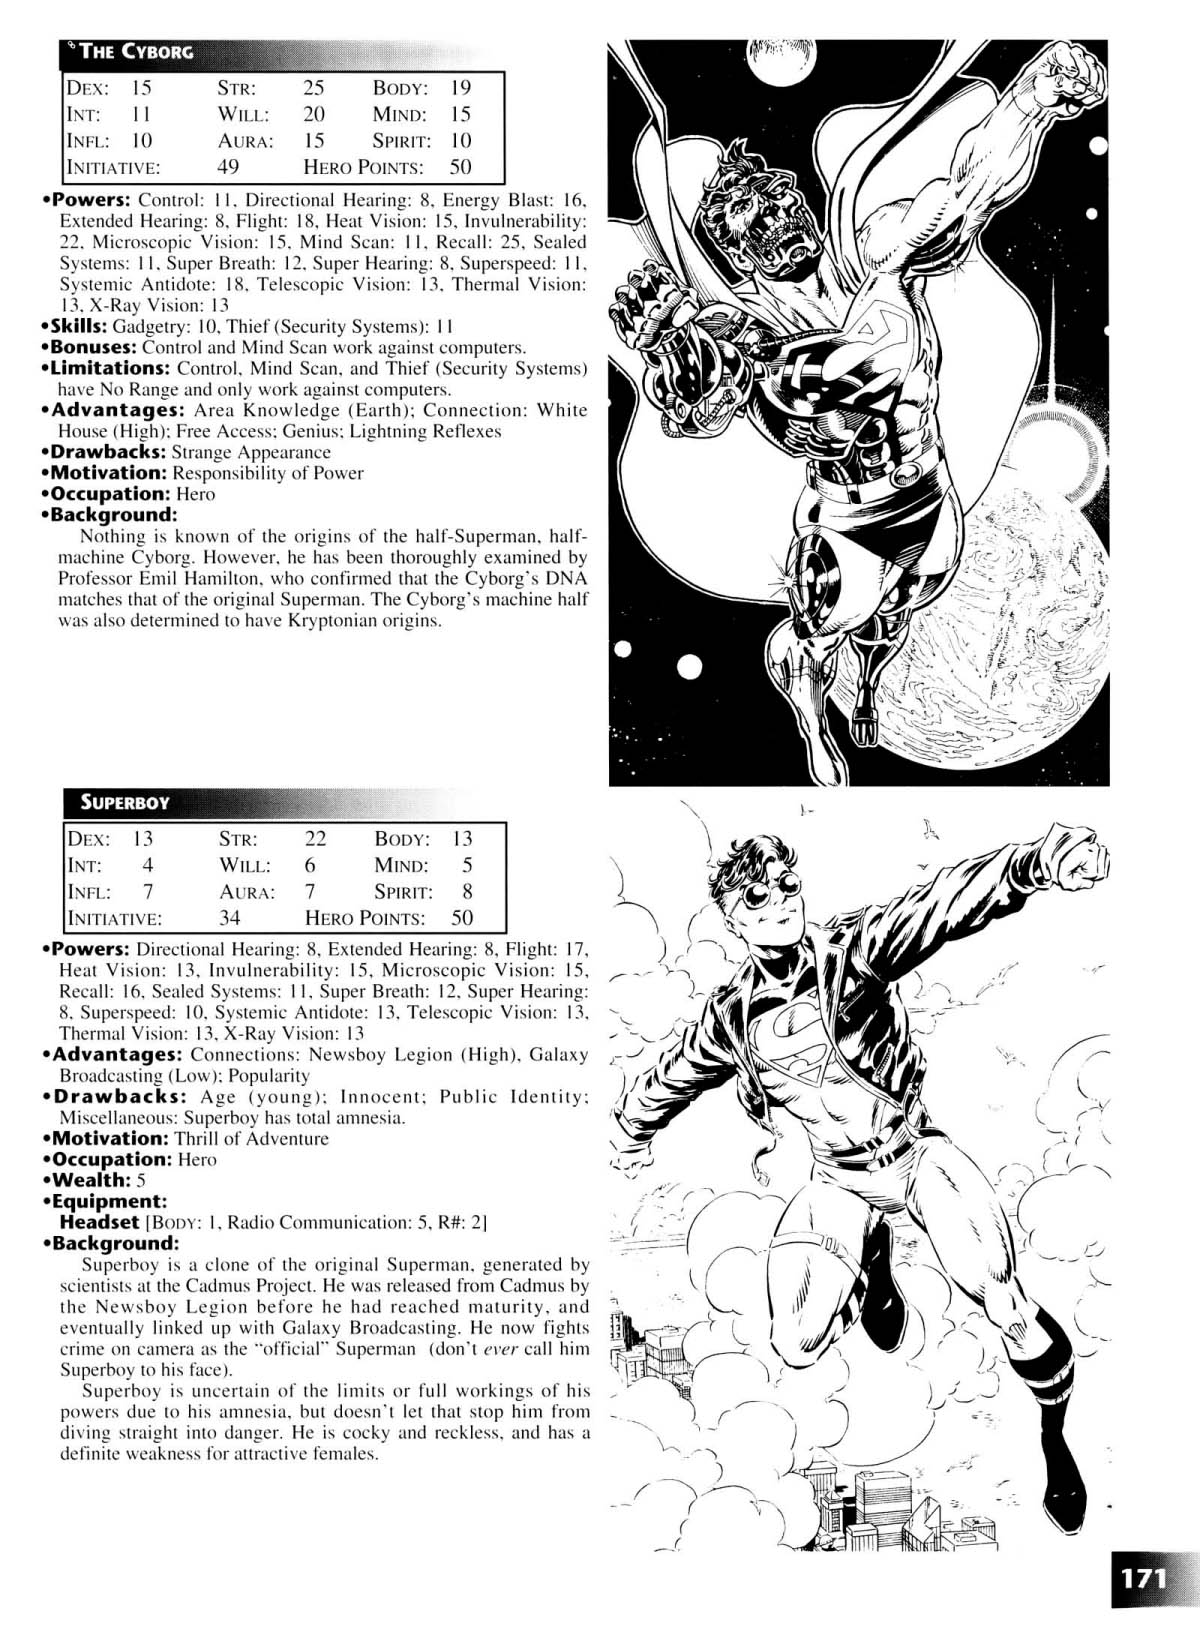 DC Heroes 3rd Edition